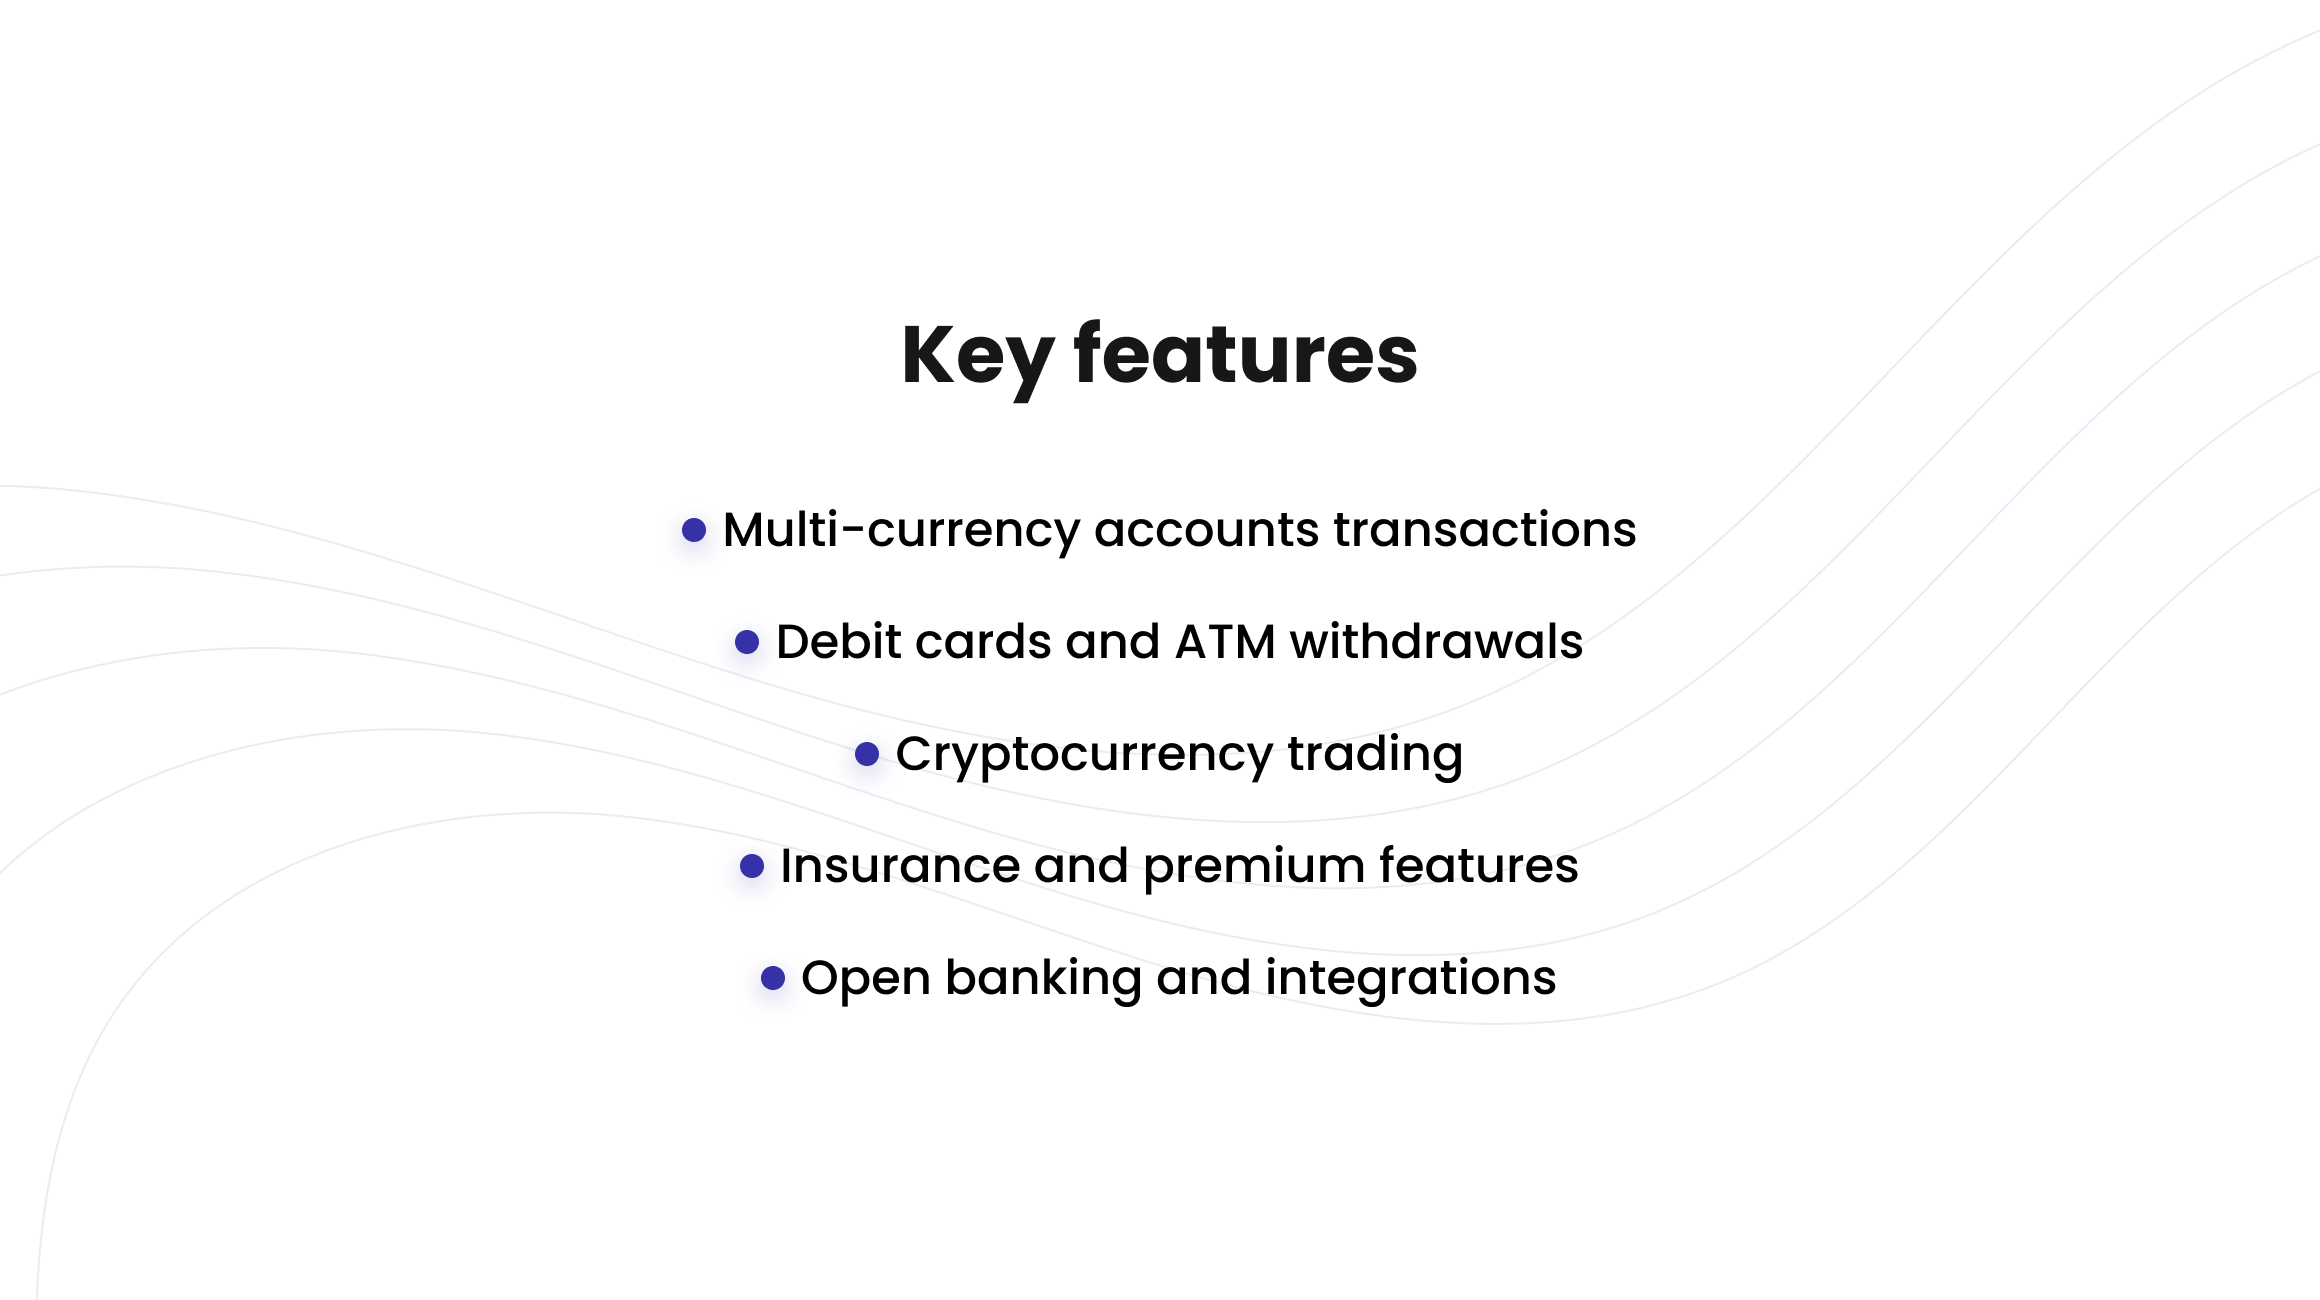 Key features and functionalities of Revolut